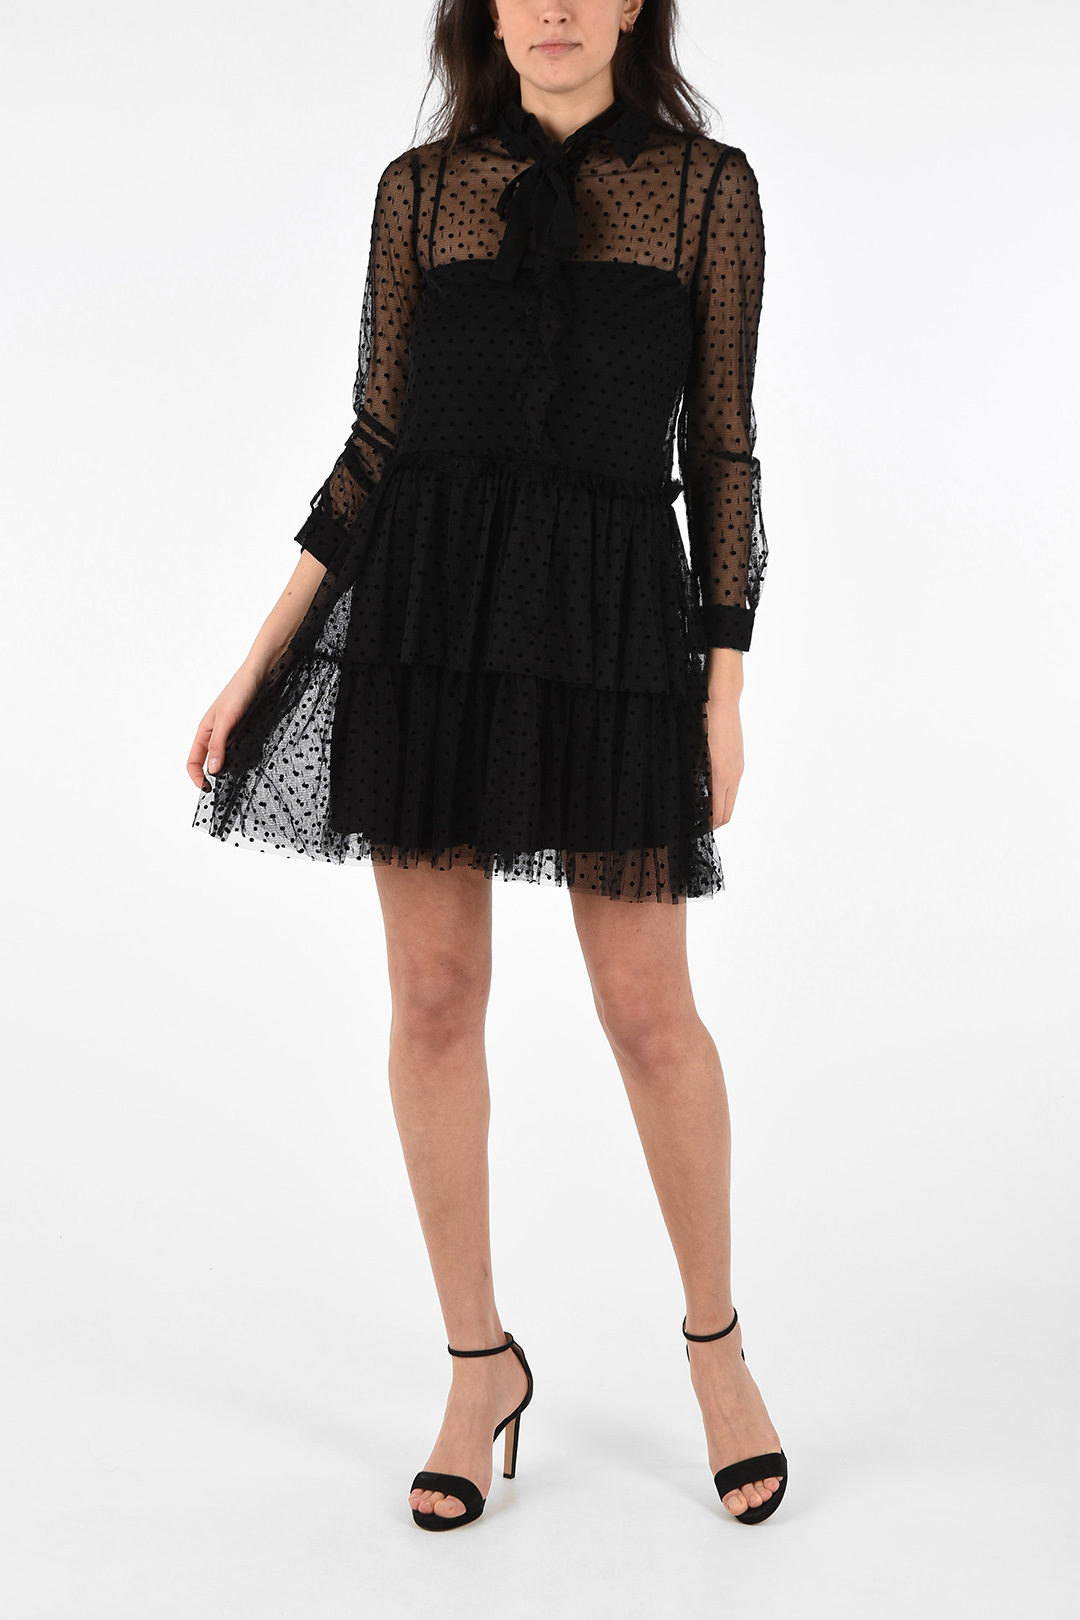 Red Valentino Tulle Polka Dot Flounced ...